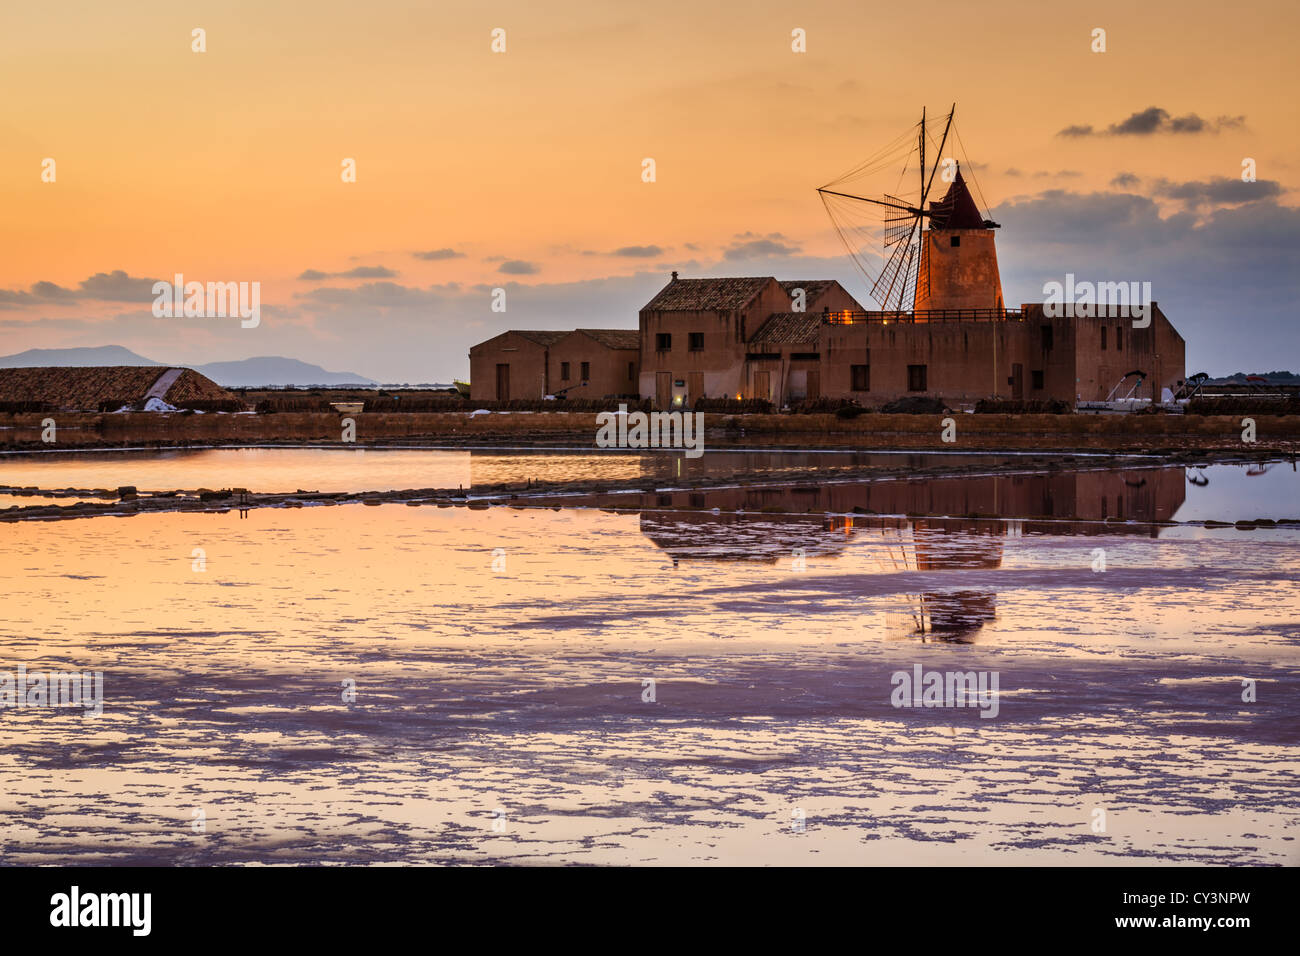 Sunset at the old saltworks in the Laguna dello Stagnone near Trapani, Sicily, Italy Stock Photo